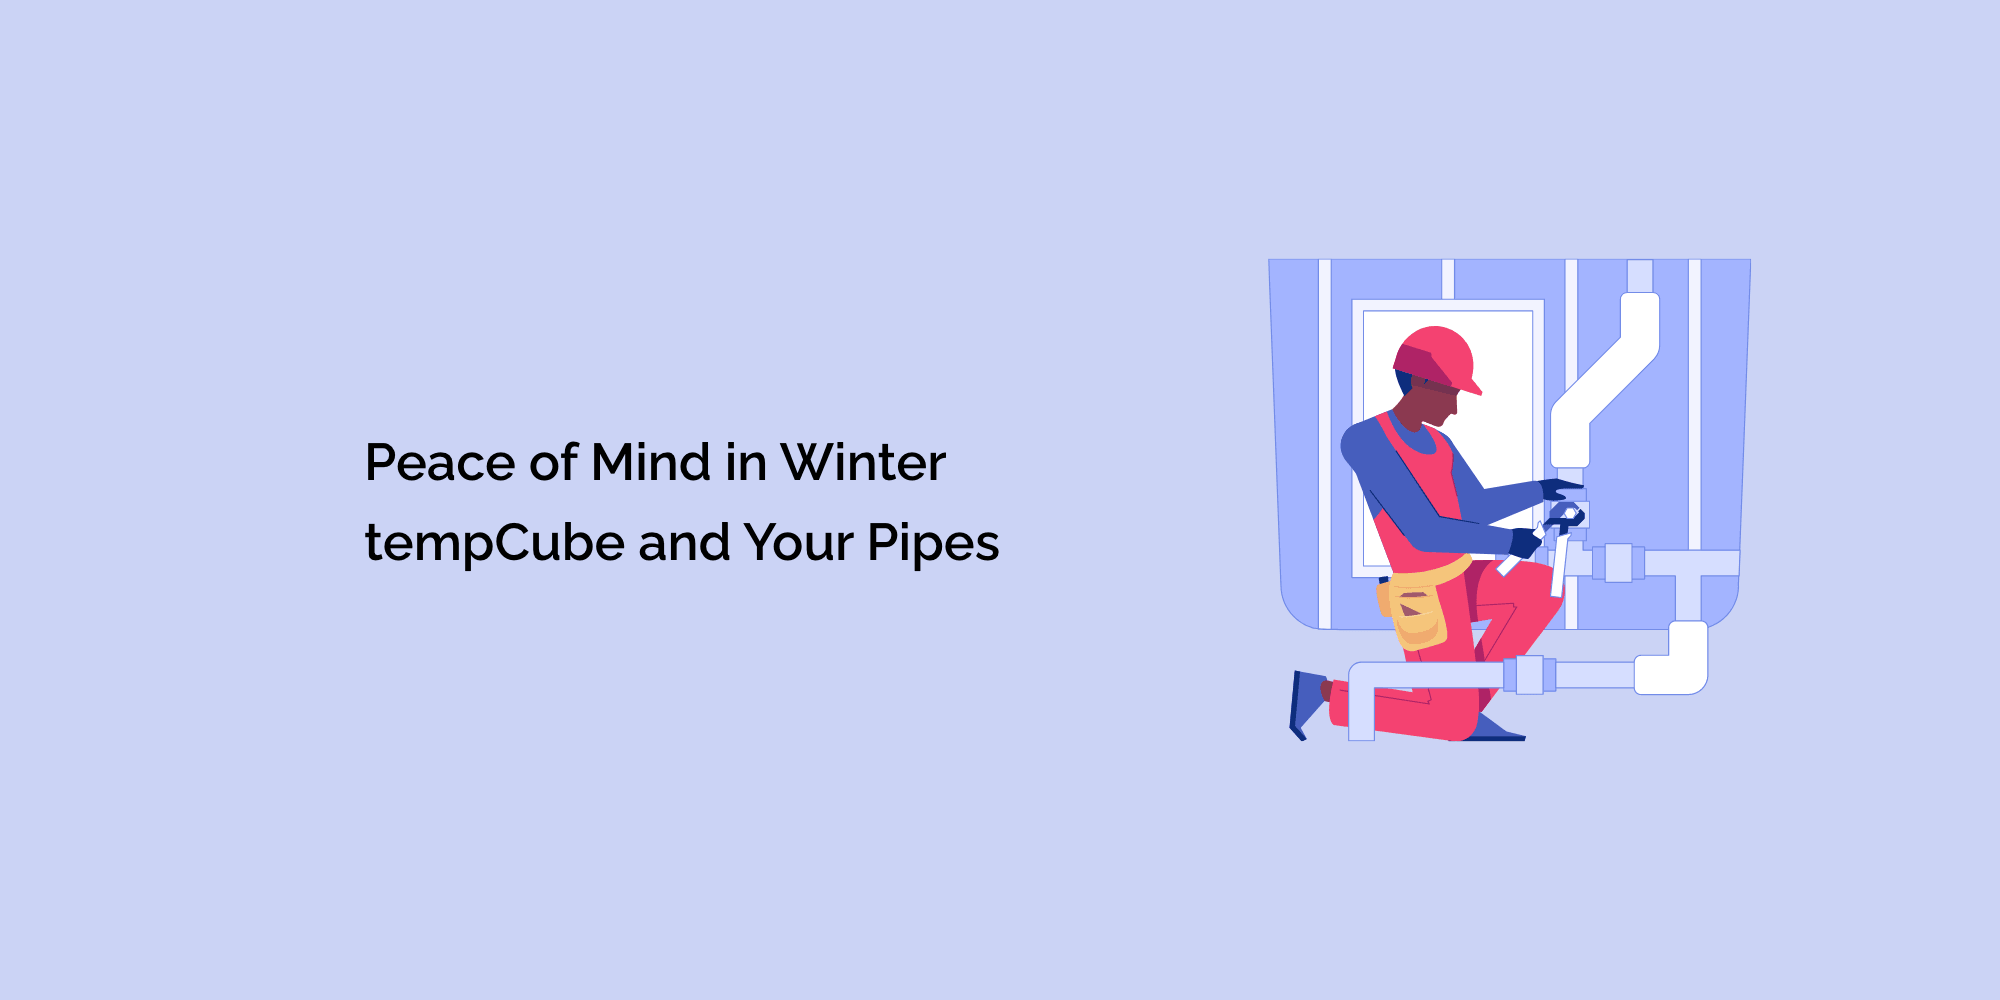 Peace of Mind in Winter: tempCube and Your Pipes